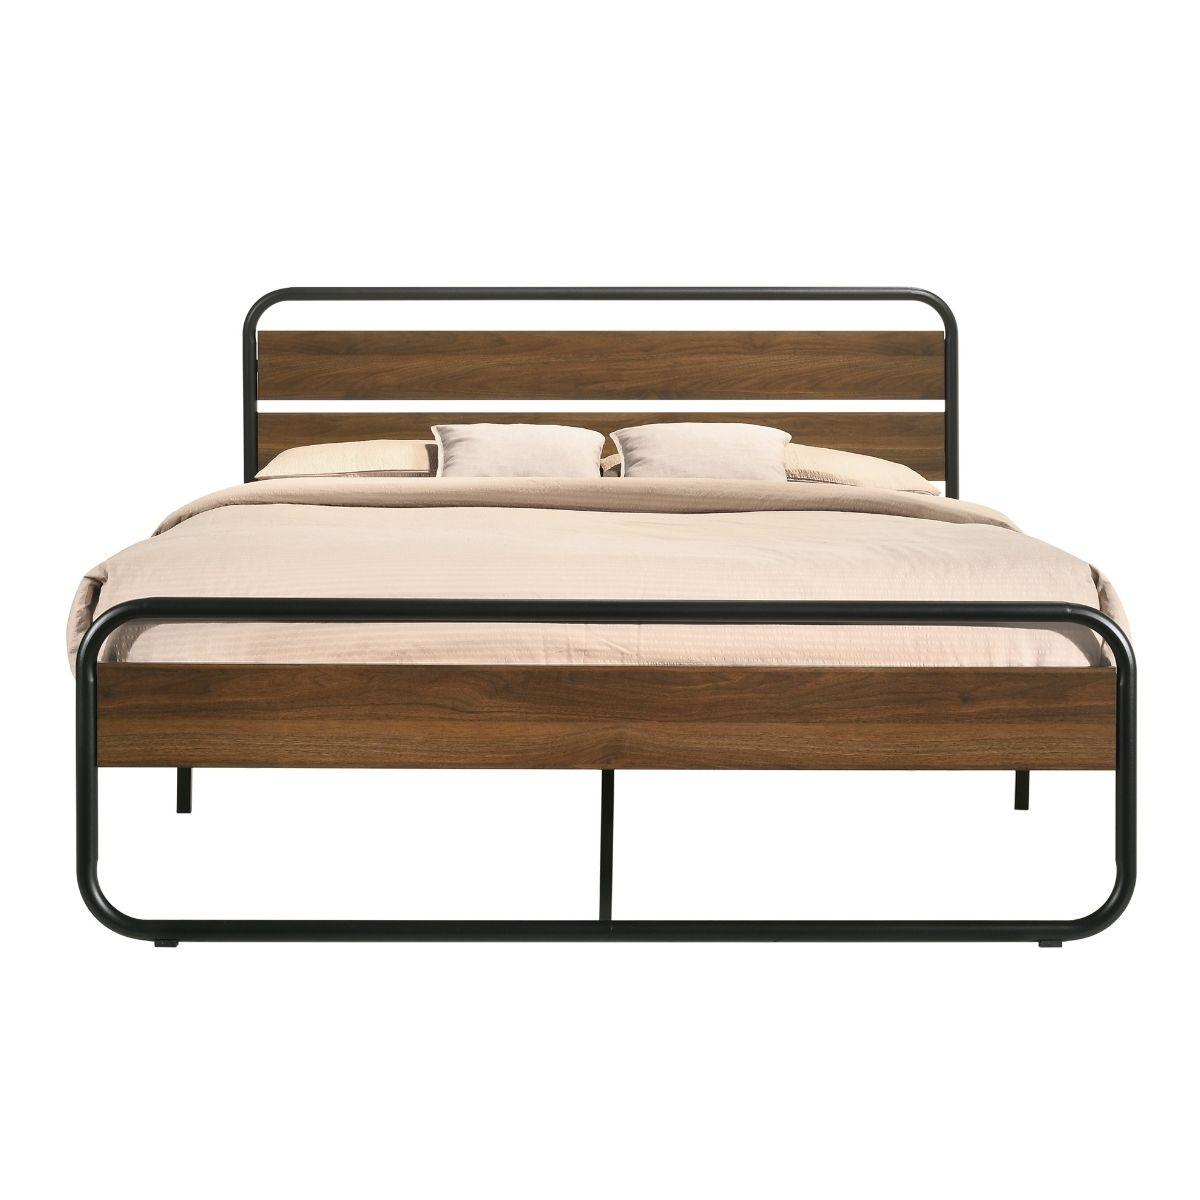 Molly Industrial Bed King Size